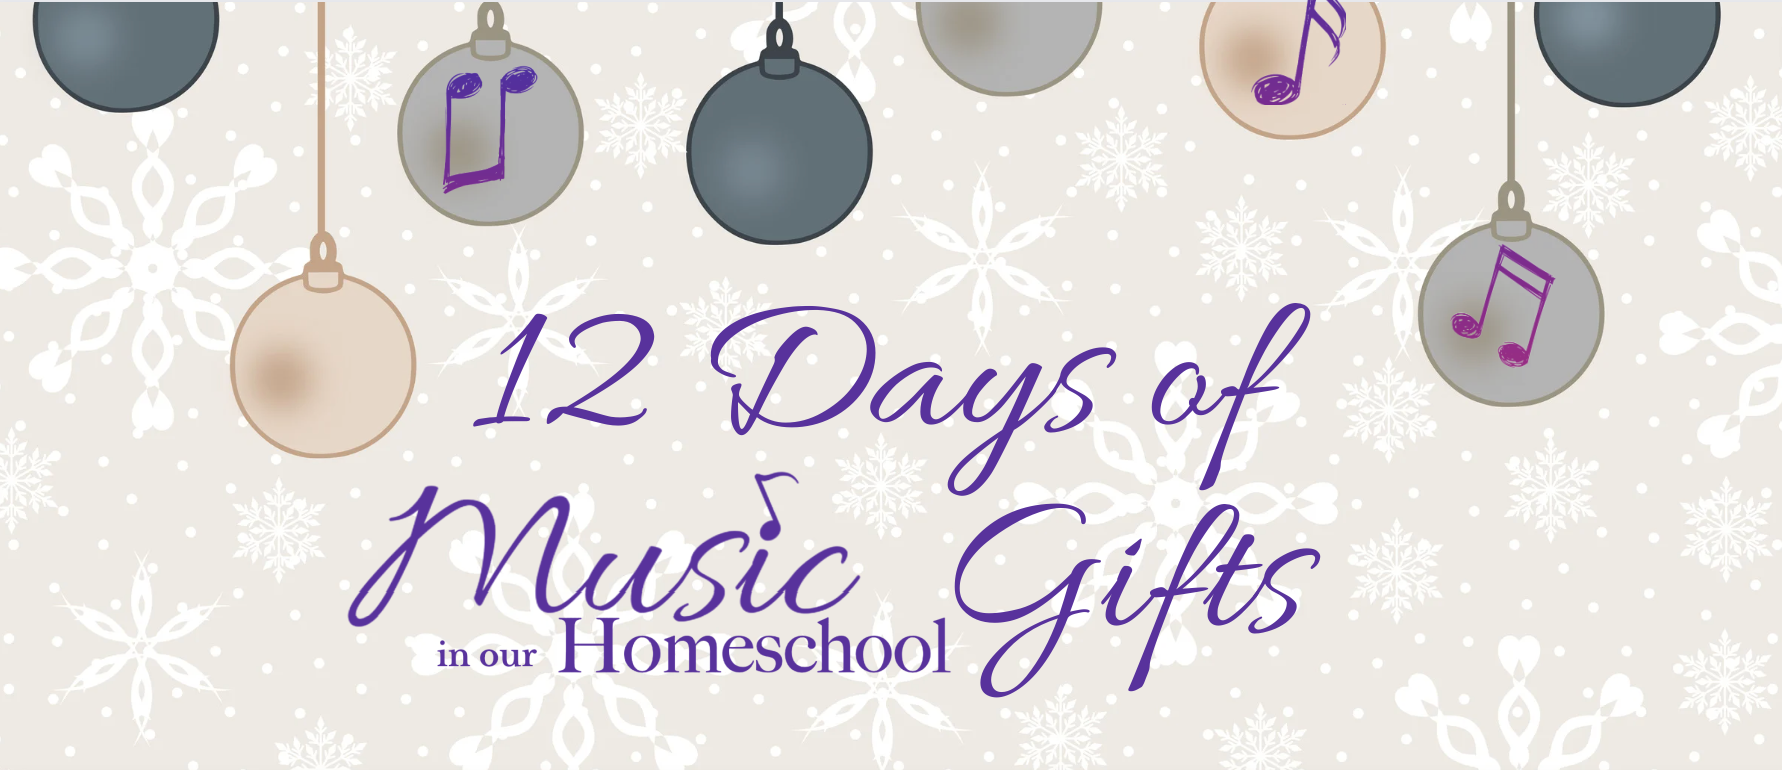 12 Days of Music in Our Homeschool gifts